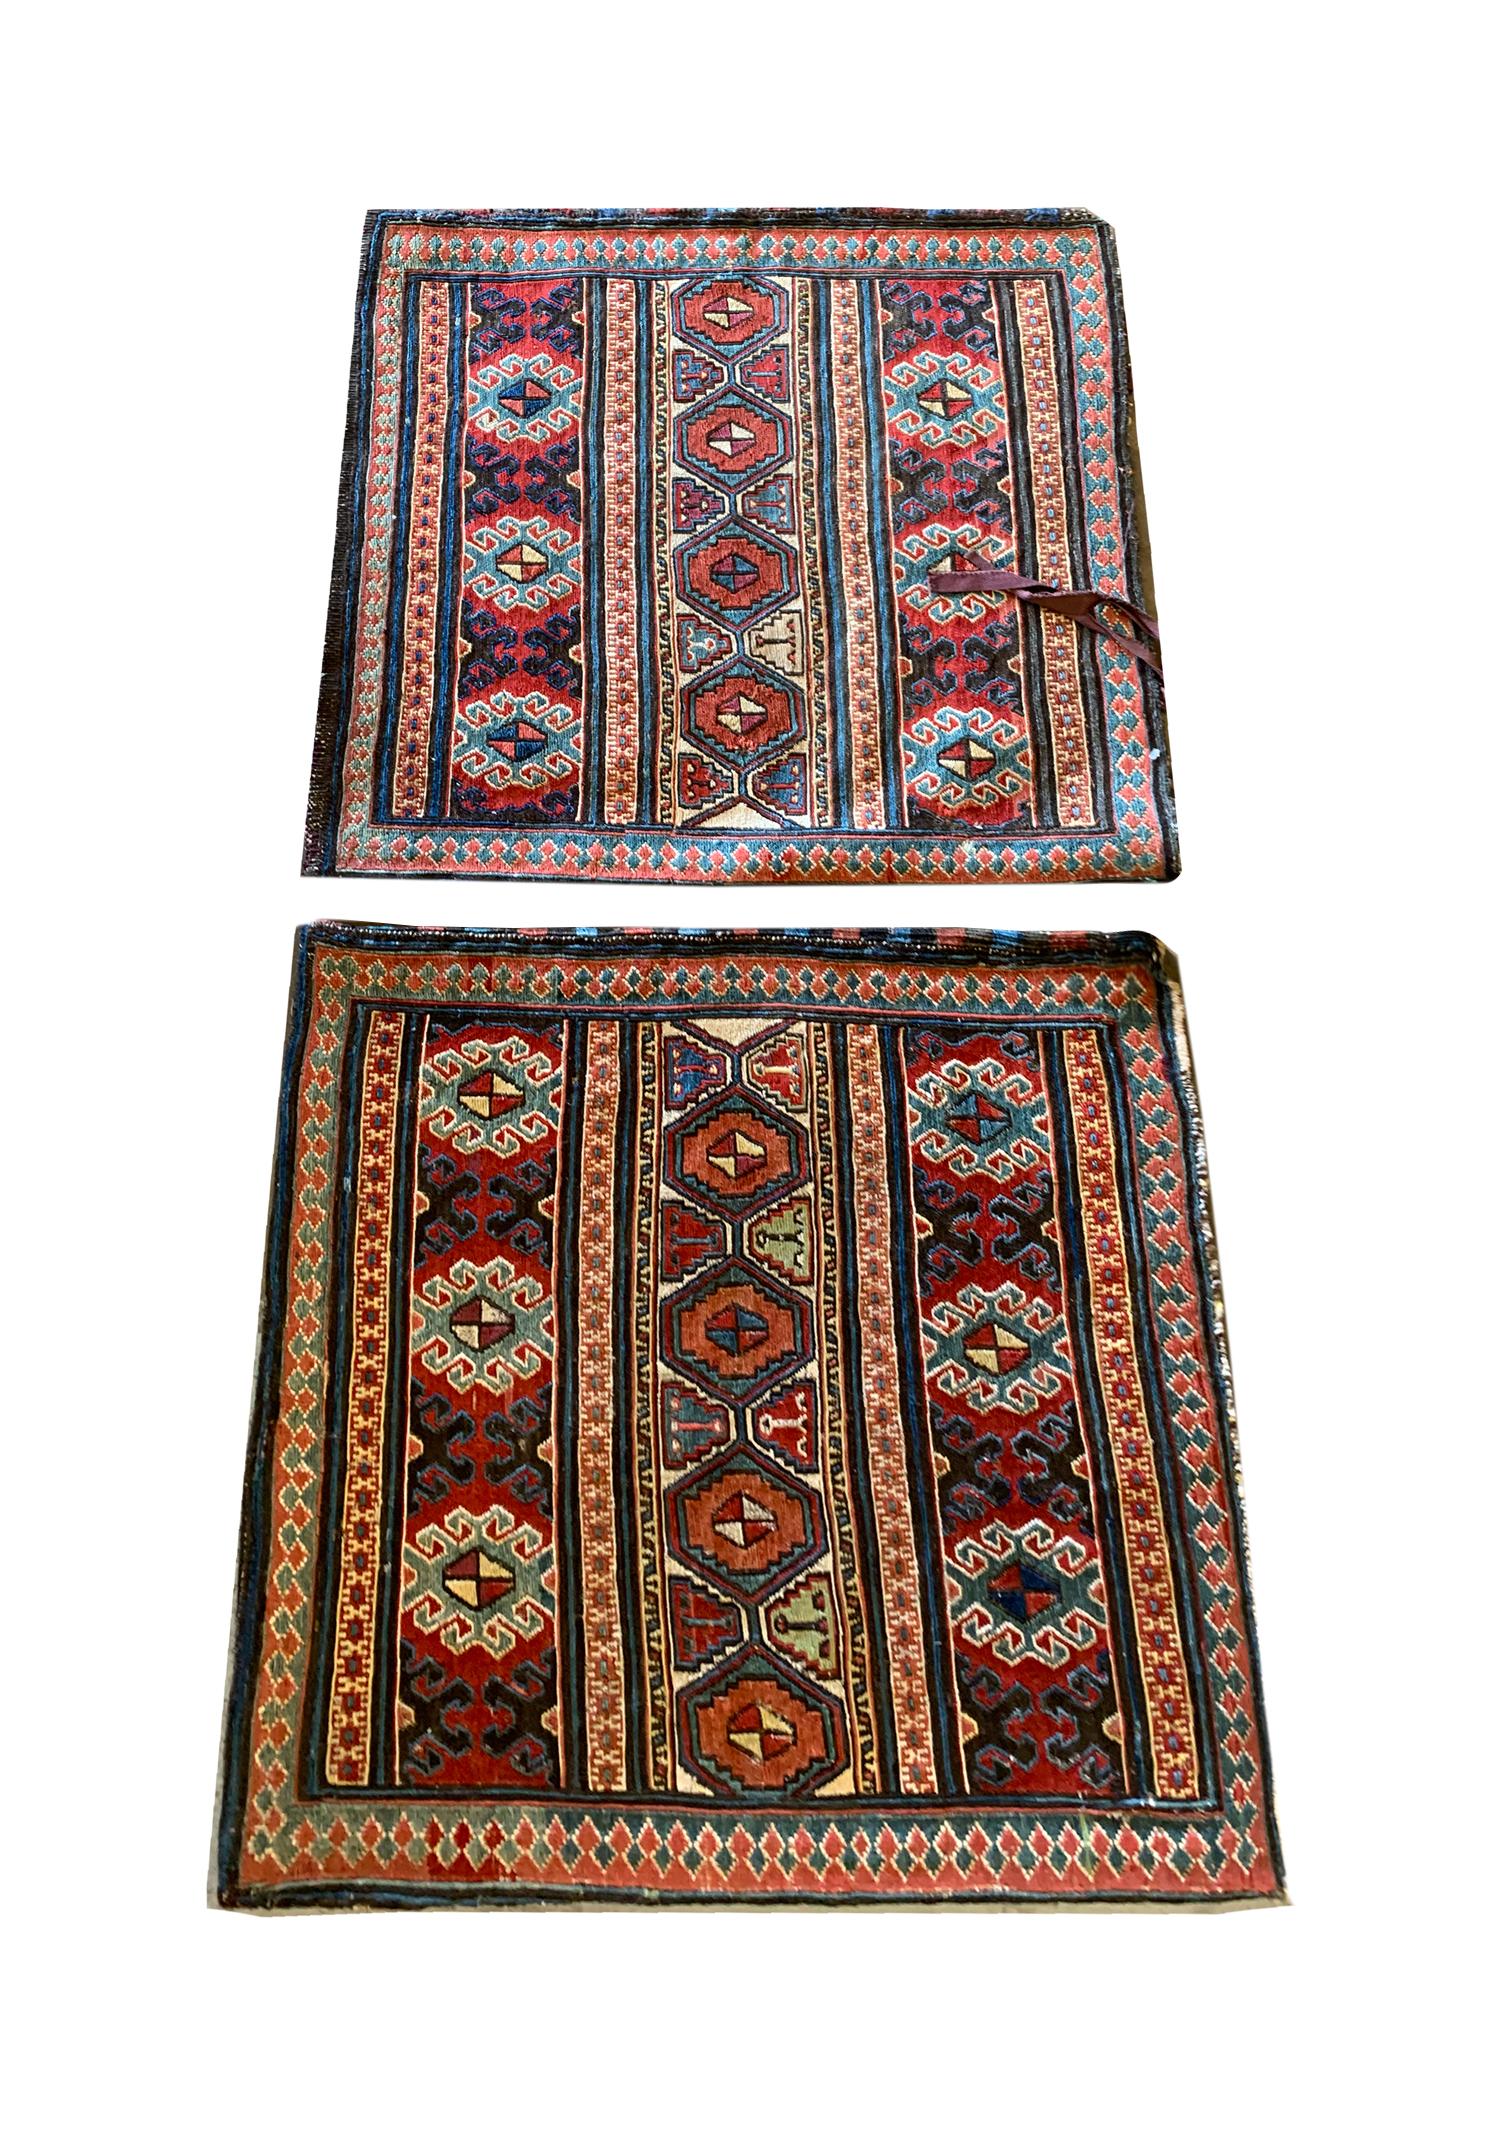 These handwoven Kilim rugs are antique pieces woven in the 1880s in Azerbaijan Moghan Area. The design features a decorative striped pattern woven with intricate medallions. Featuring red, blue cream and beige colours. Woven to perfection these